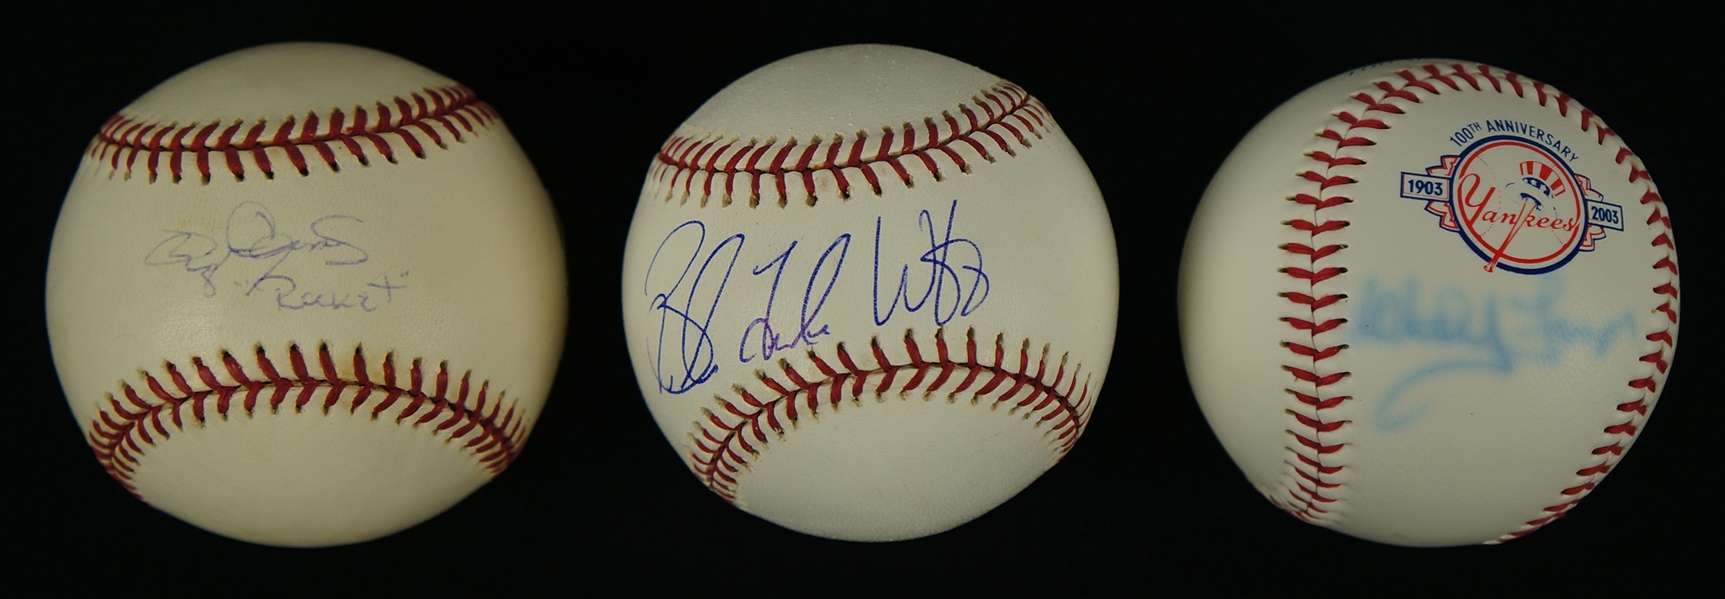 Collection of 3 Autographed Baseballs w/Whitey Ford